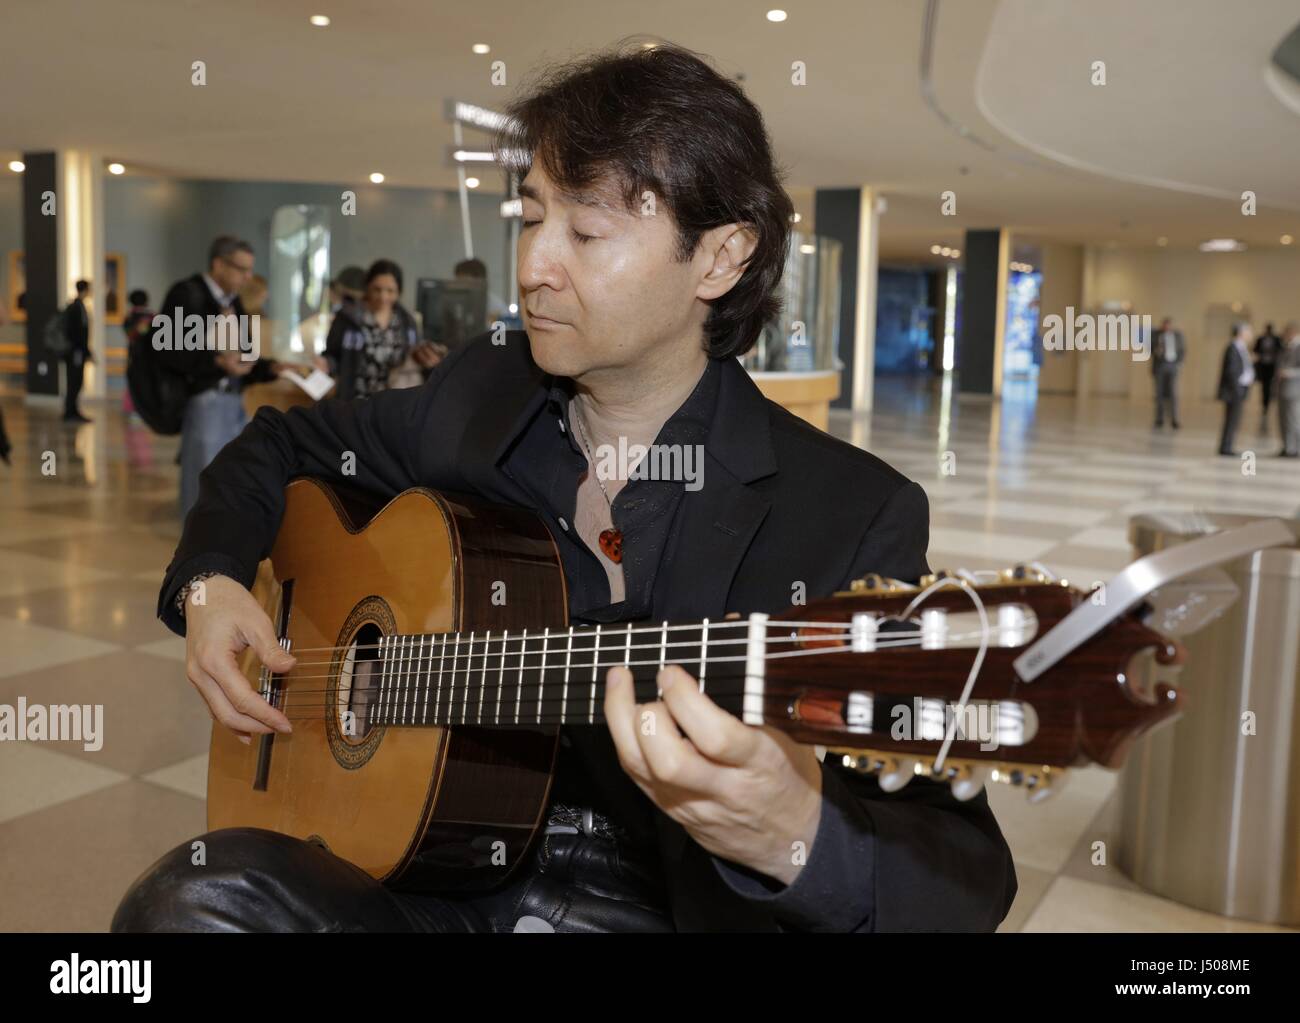 United Nations, New York, USA, May 12 2017 - PEACE IS a Concert by Shiro Otake honoring Argentina guitar player Atahualpa Yupanqui today at the UN Headquarters in New York. Photo: Luiz Rampelotto/EuropaNewswire | Verwendung weltweit/picture alliance Stock Photo